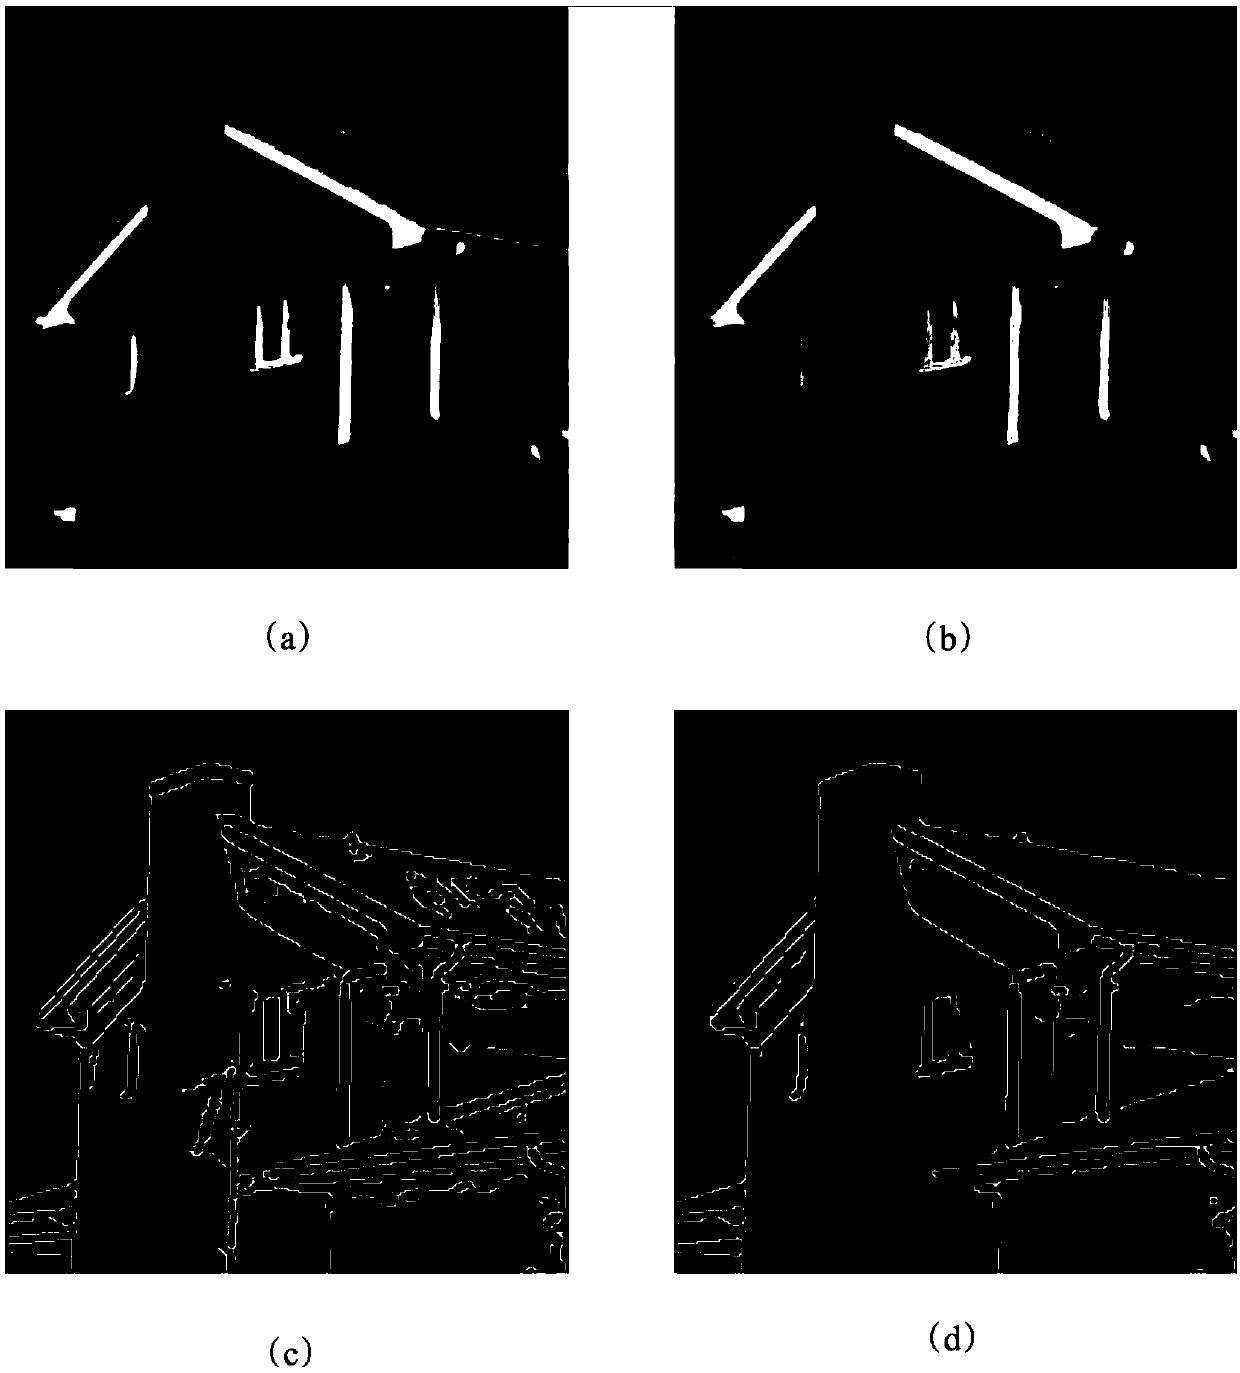 Image reconstruction method based on second-order L0 minimization and edge priori